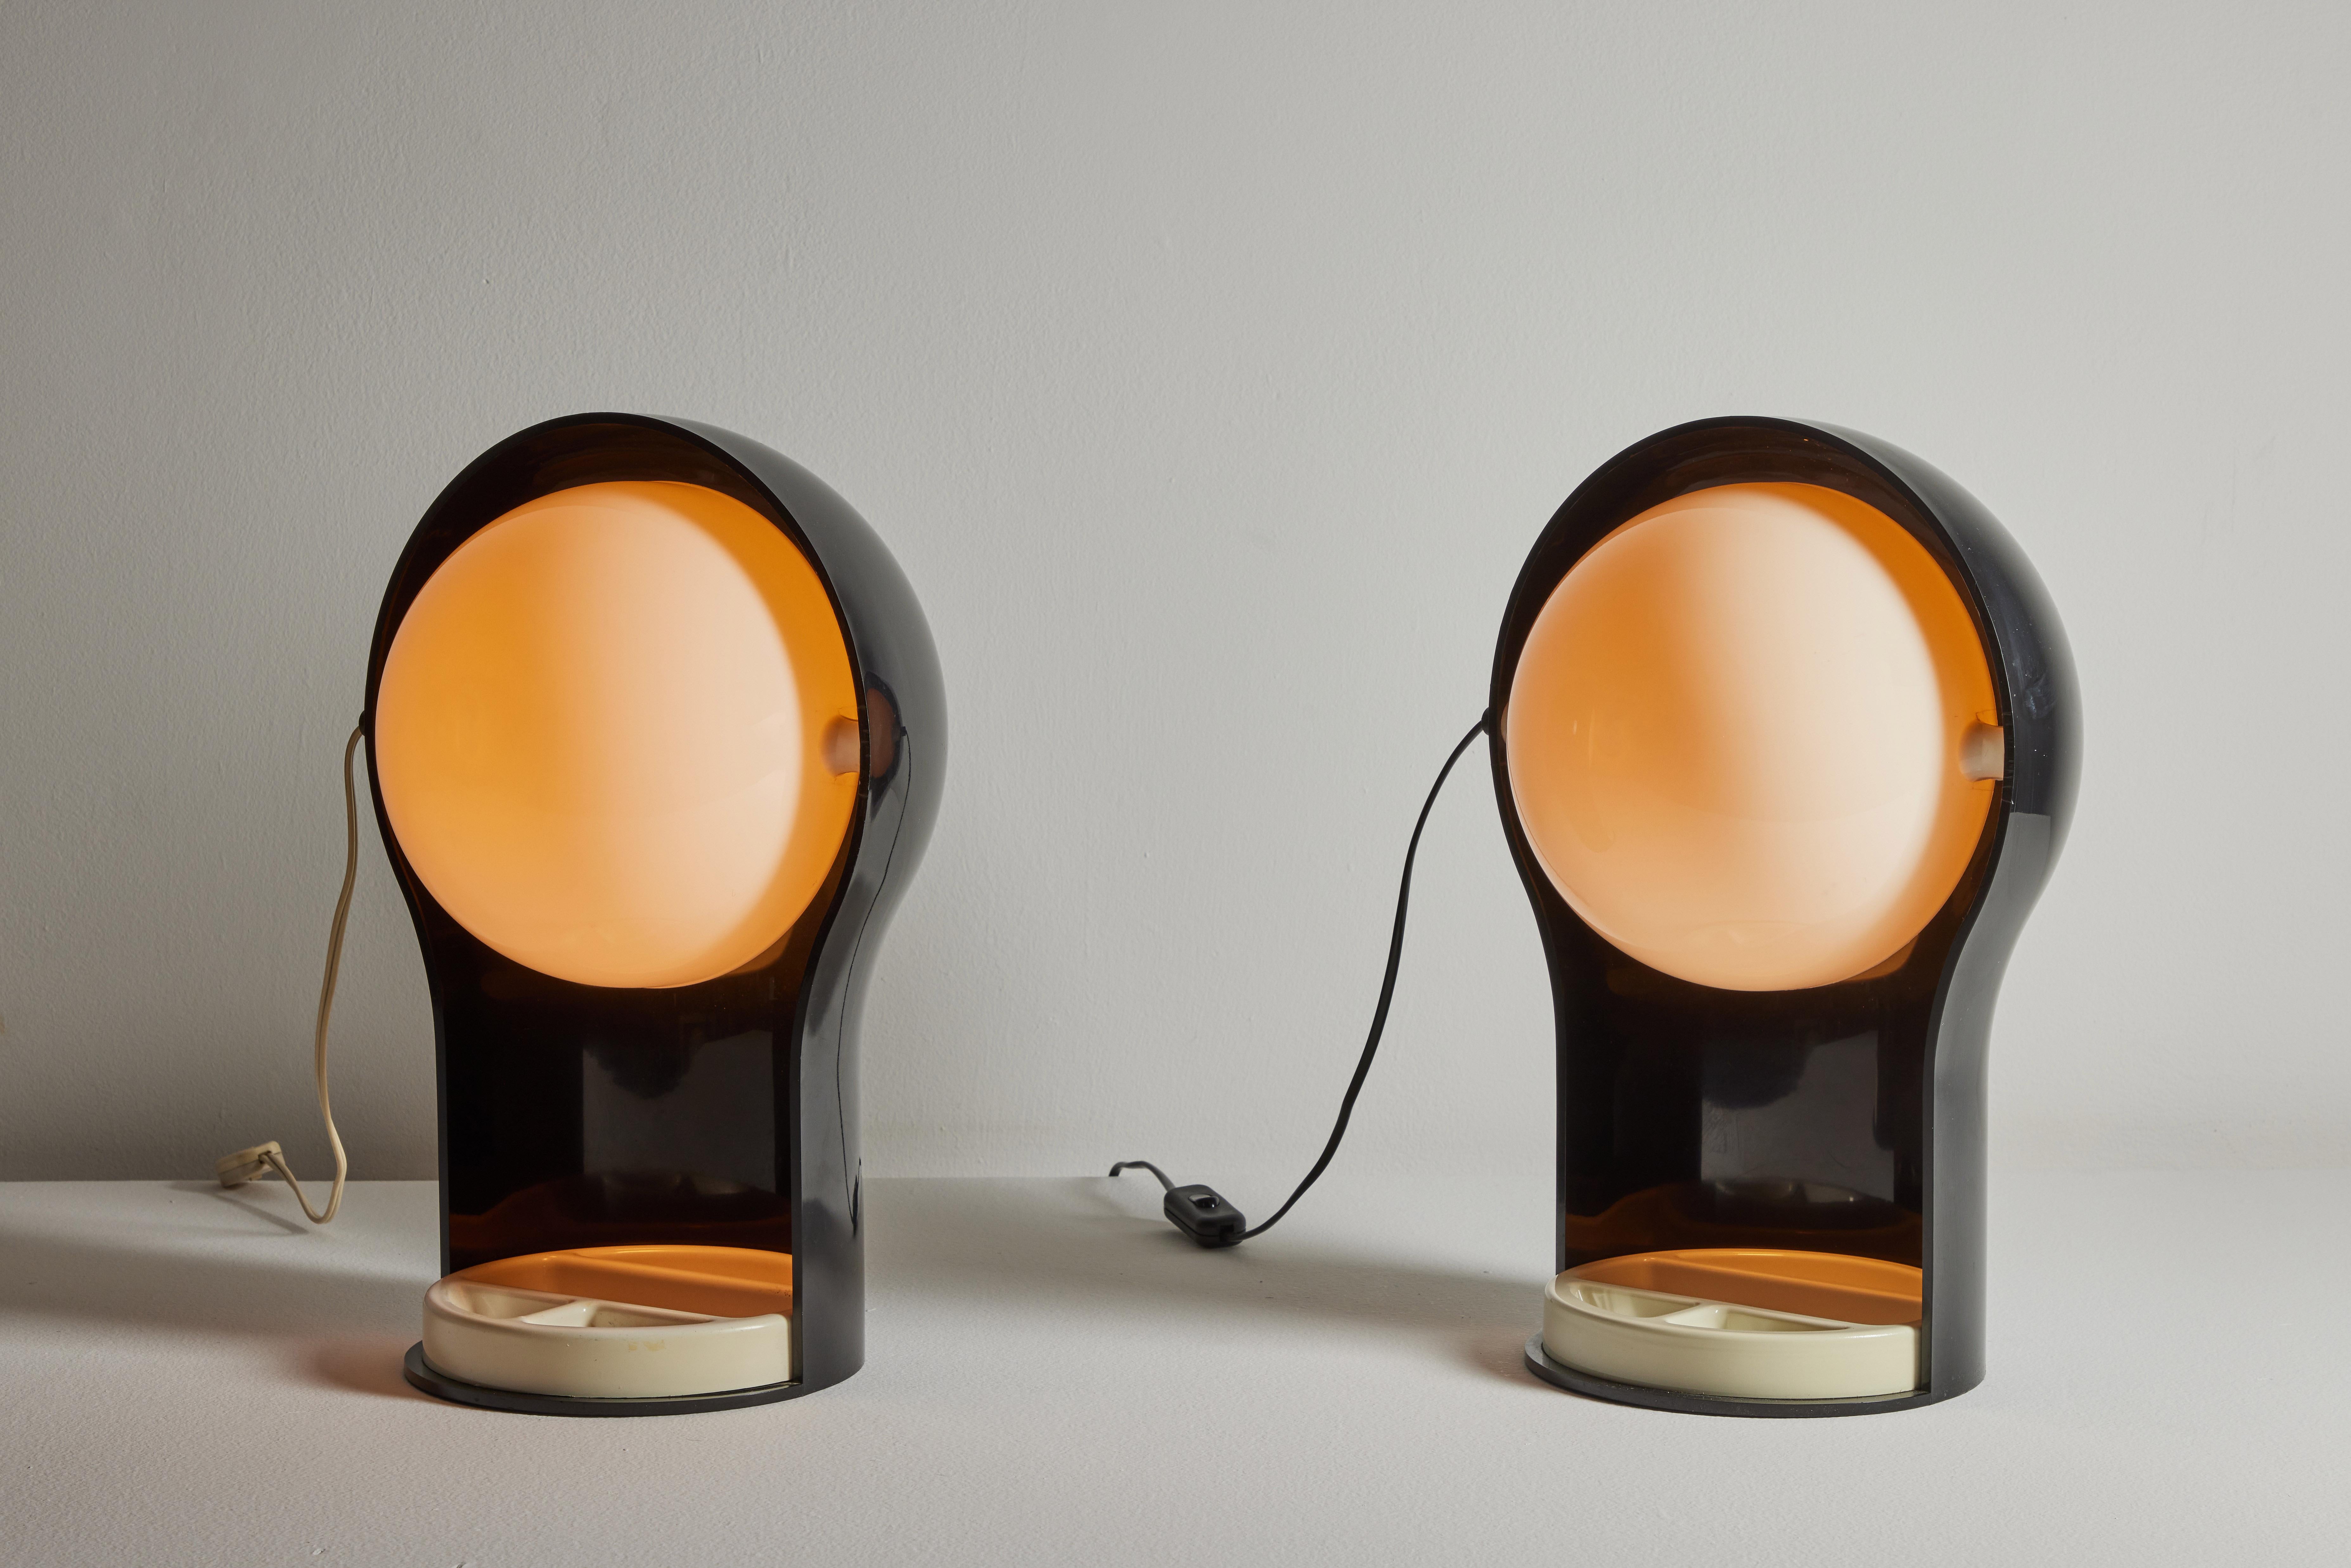 Two table lamps by Vico Magistretti for Artemide. Designed and manufactured in Italy, 1968. Enameled metal, perspex. Original European cord. U.S. adaptor provided. Rewiring with U.S. cord for additional fee and lead time. We recommend one E14 60w